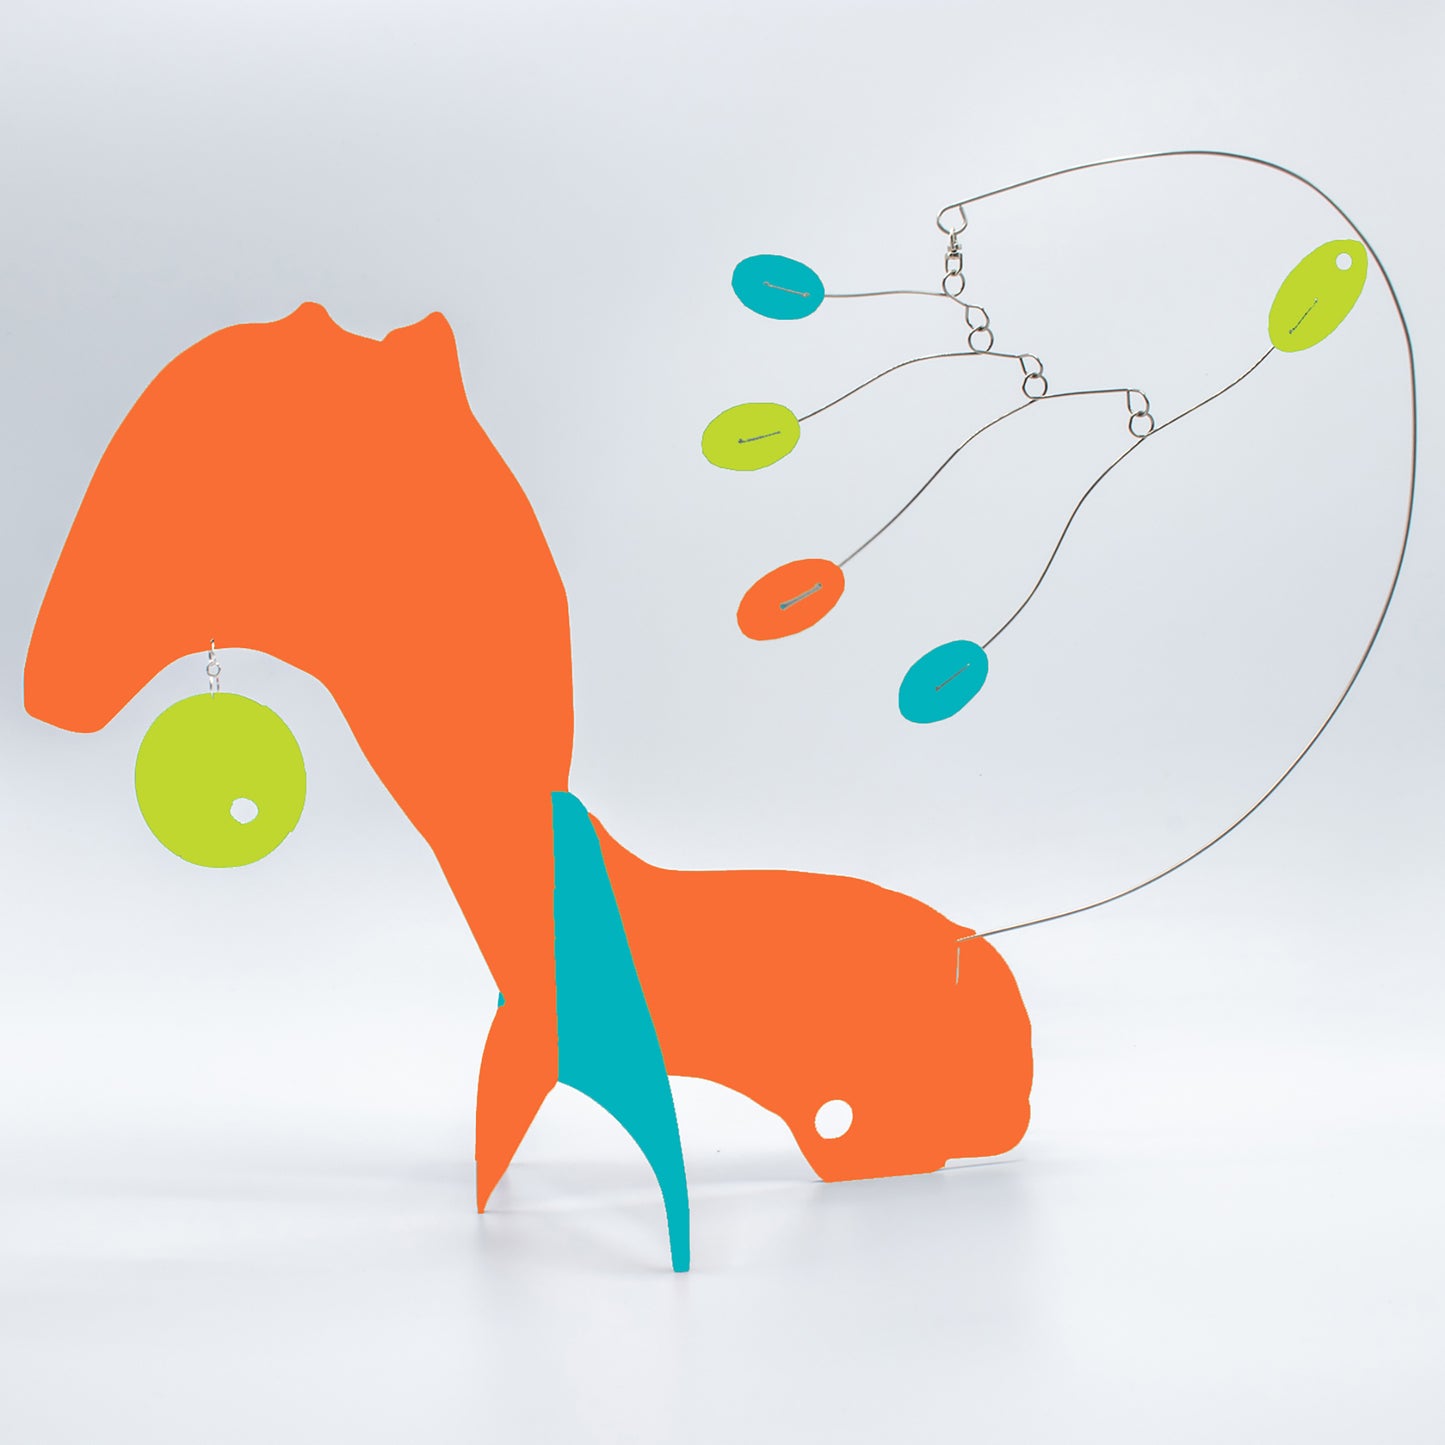 KinetiCats Collection Fox in Orange, Aqua, and Lime Green - one of 12 Modern Cute Abstract Animal Art Sculpture Kinetic Stabiles inspired by Dada and mid century modern style art by AtomicMobiles.com